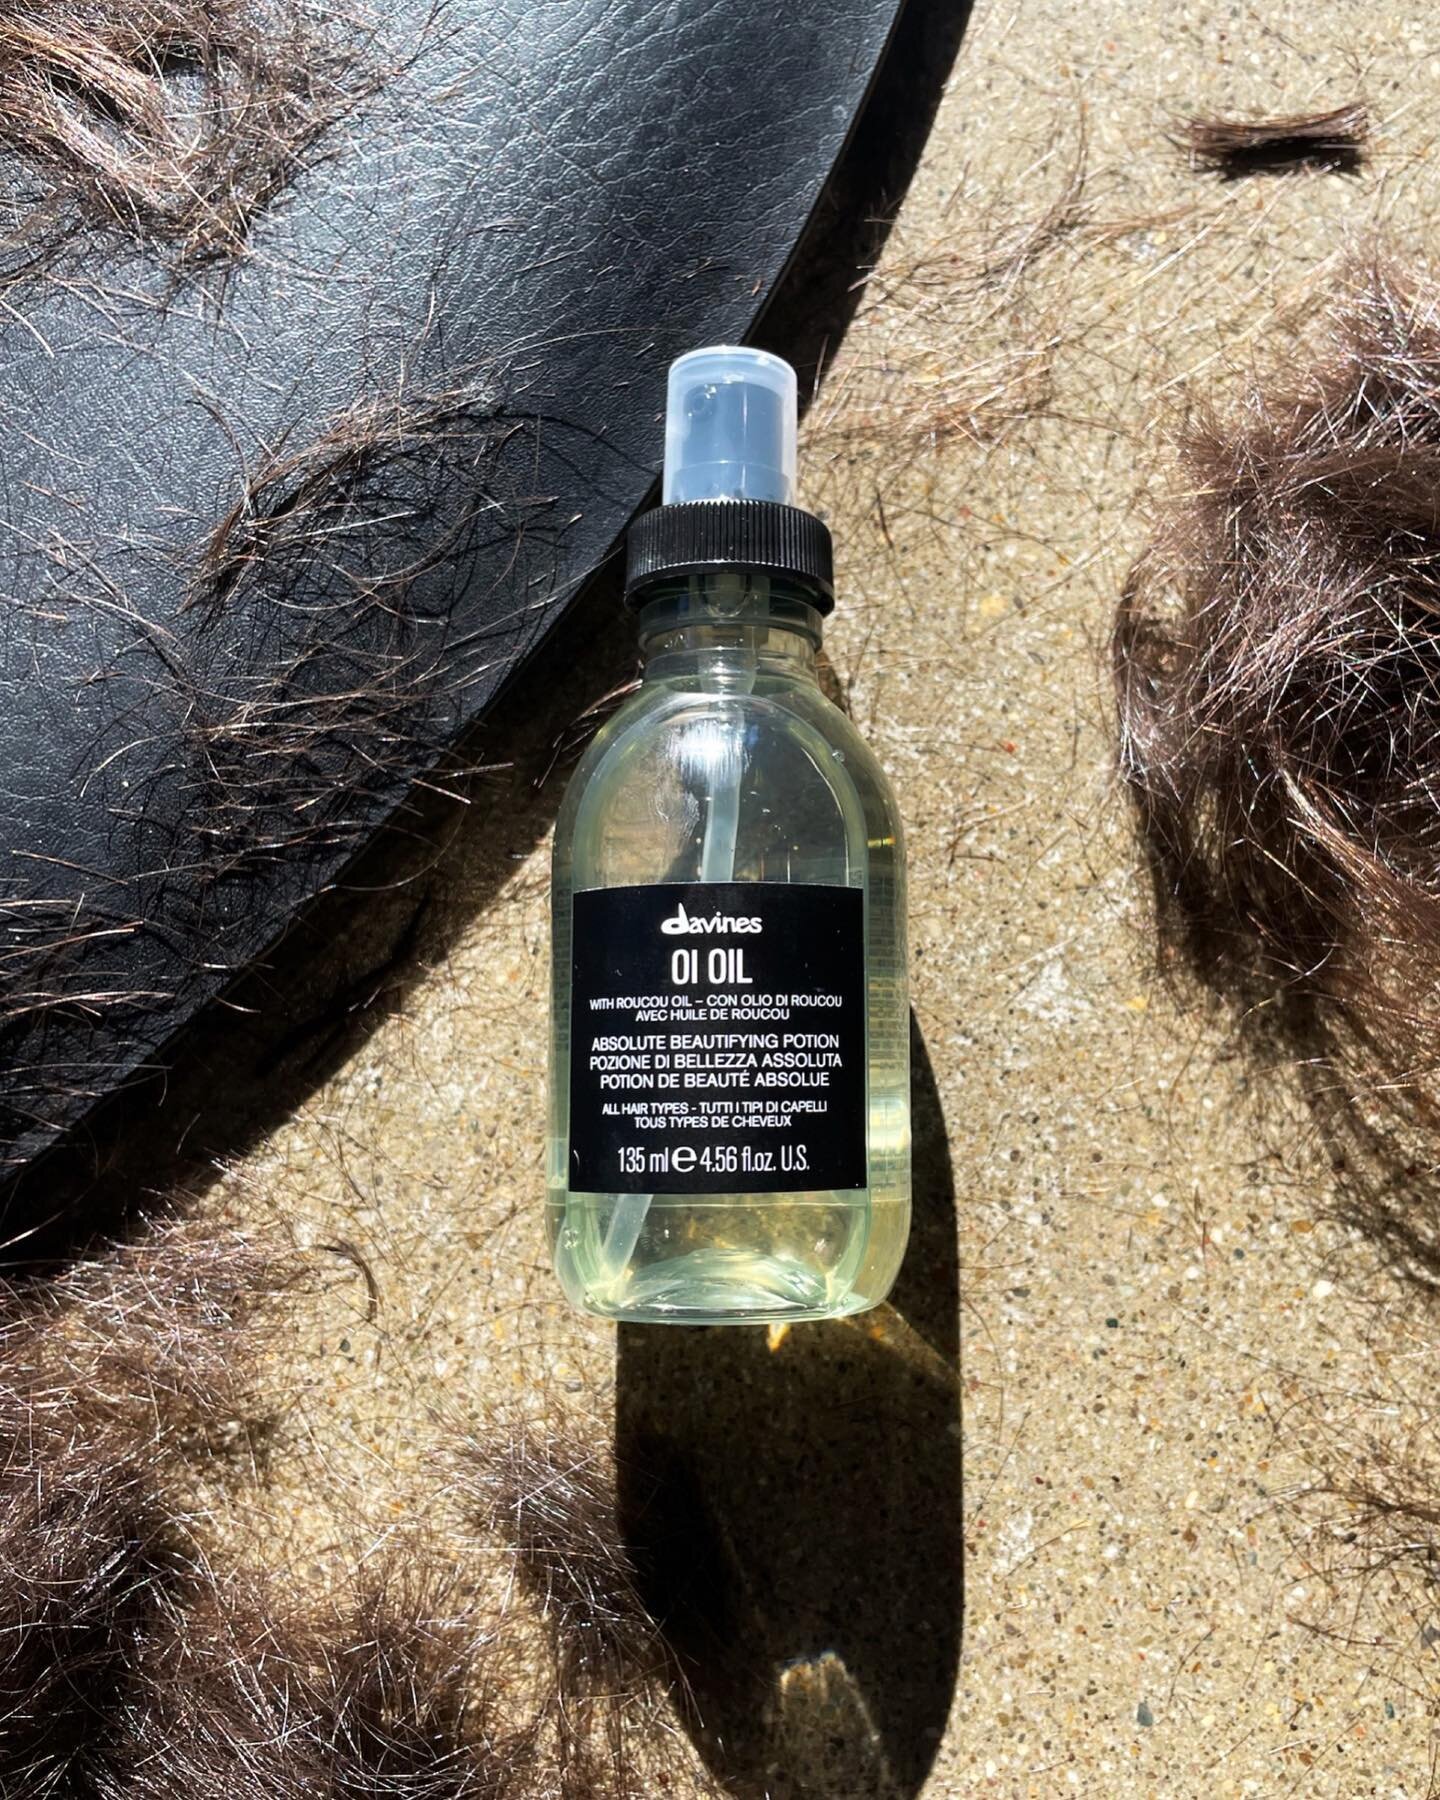 The perfect lightweight oil doesn&rsquo;t exi&hellip;

😏 Oi Oil is nourishing, lightweight enough for all hair types, and extremely versatile. You can use it to detangle wet hair + smooth frizz and those pesky flyaways on dry hair. Not to mention, i